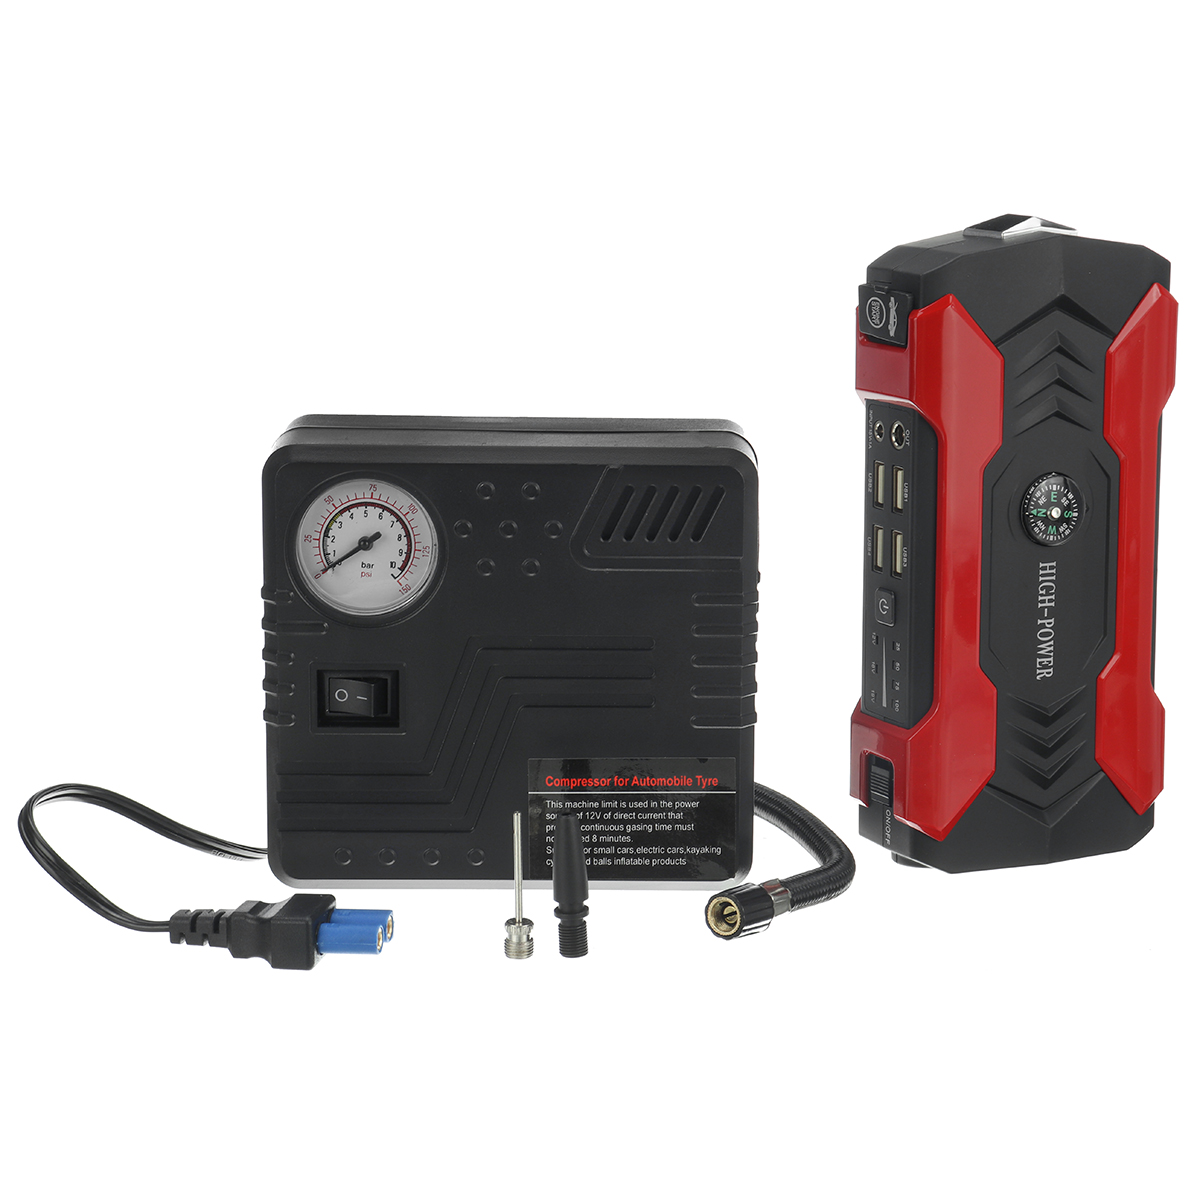 12V-Car-Jump-Starter-Battery-Booster-4USB-LED-Emergency-Auto-Quick-Charge-Power-Bank-1843625-4